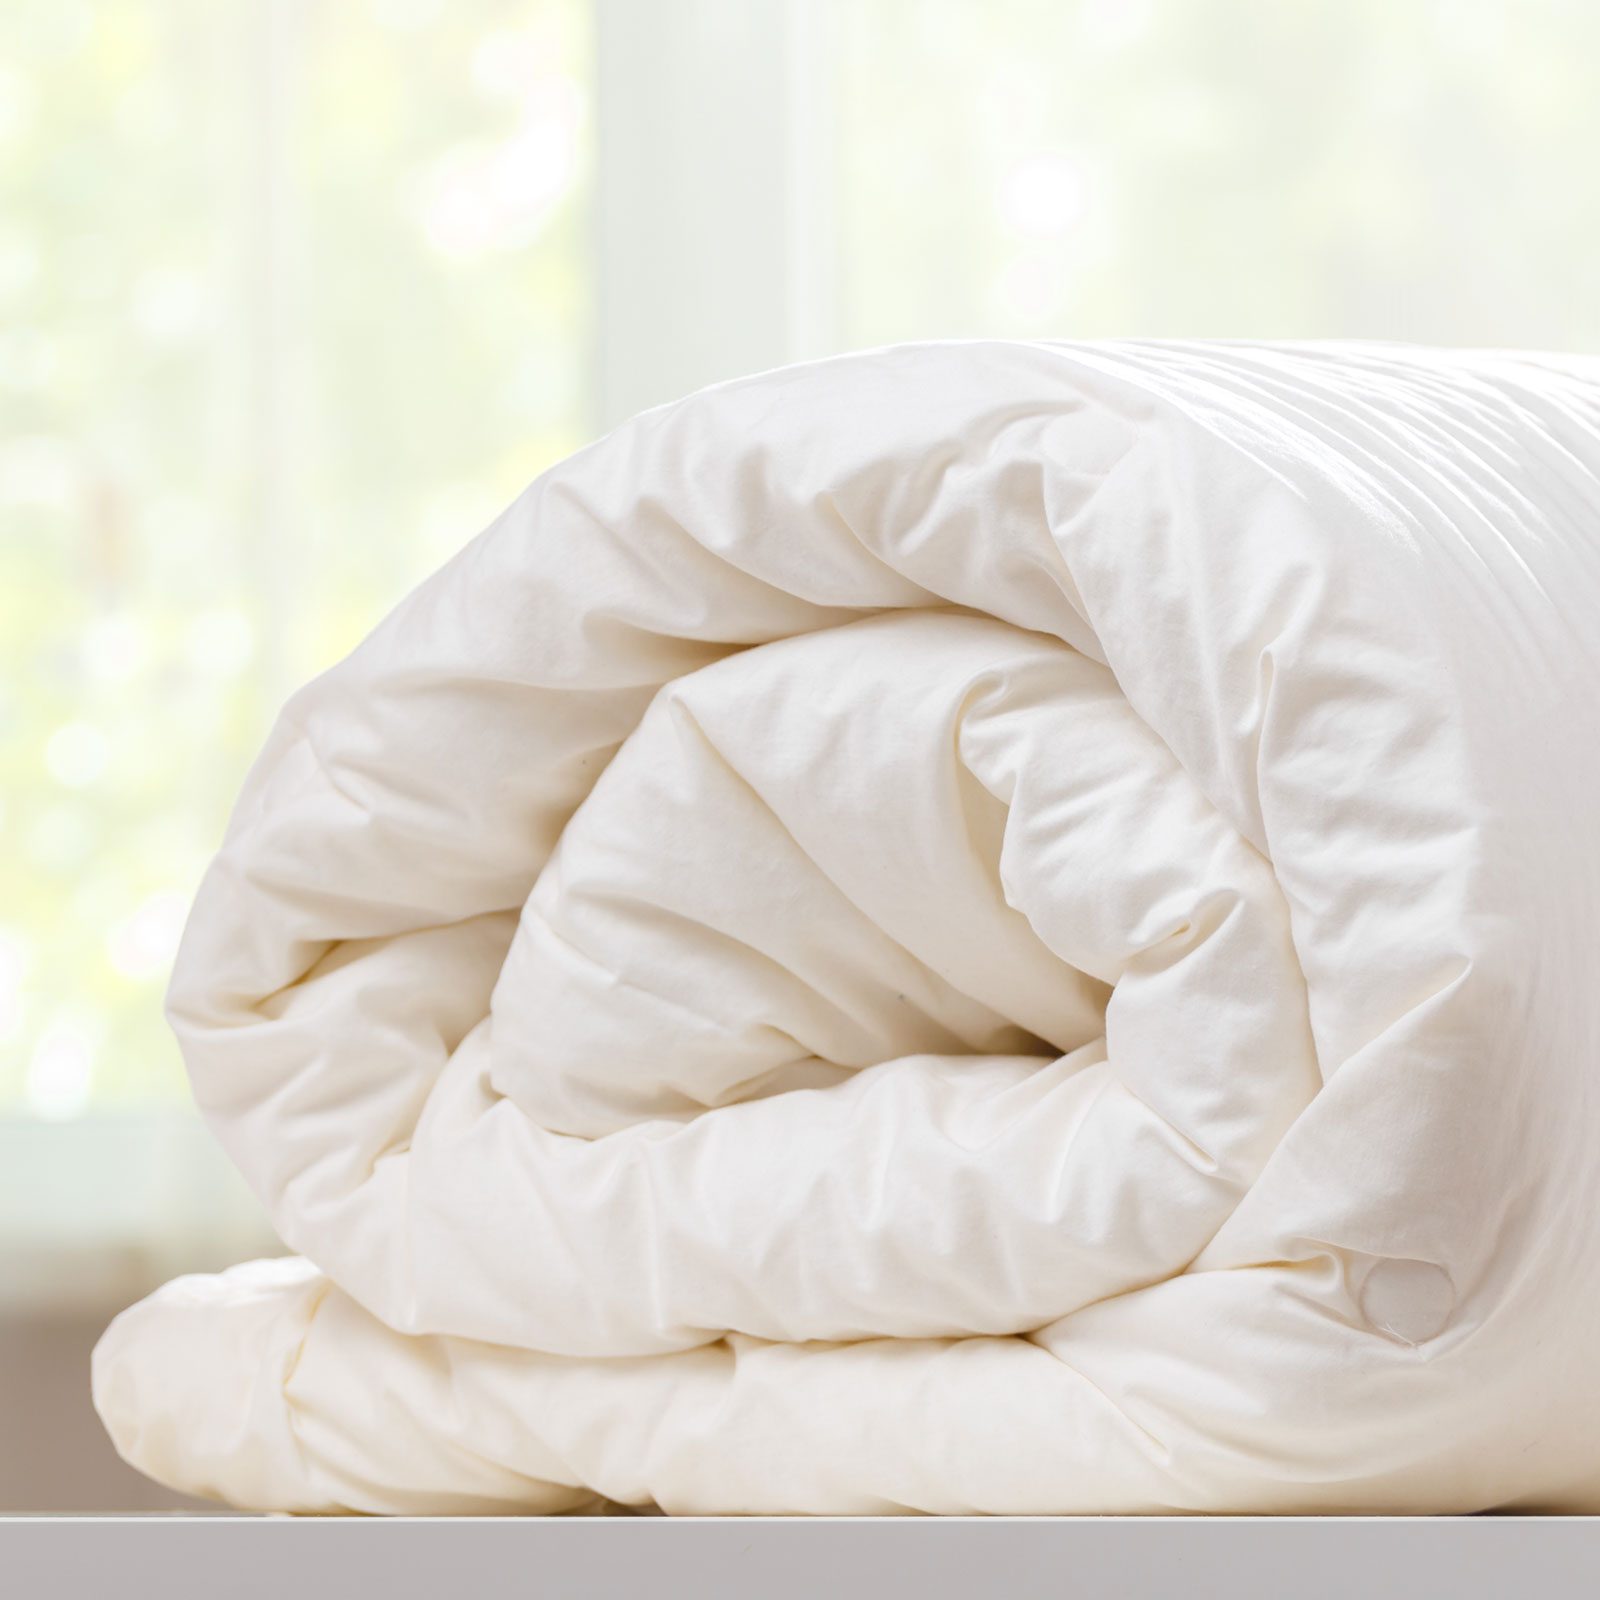 A Folded Rolled Duvet cover Is Lying On The Dresser Against The Background Of A Blurred Window